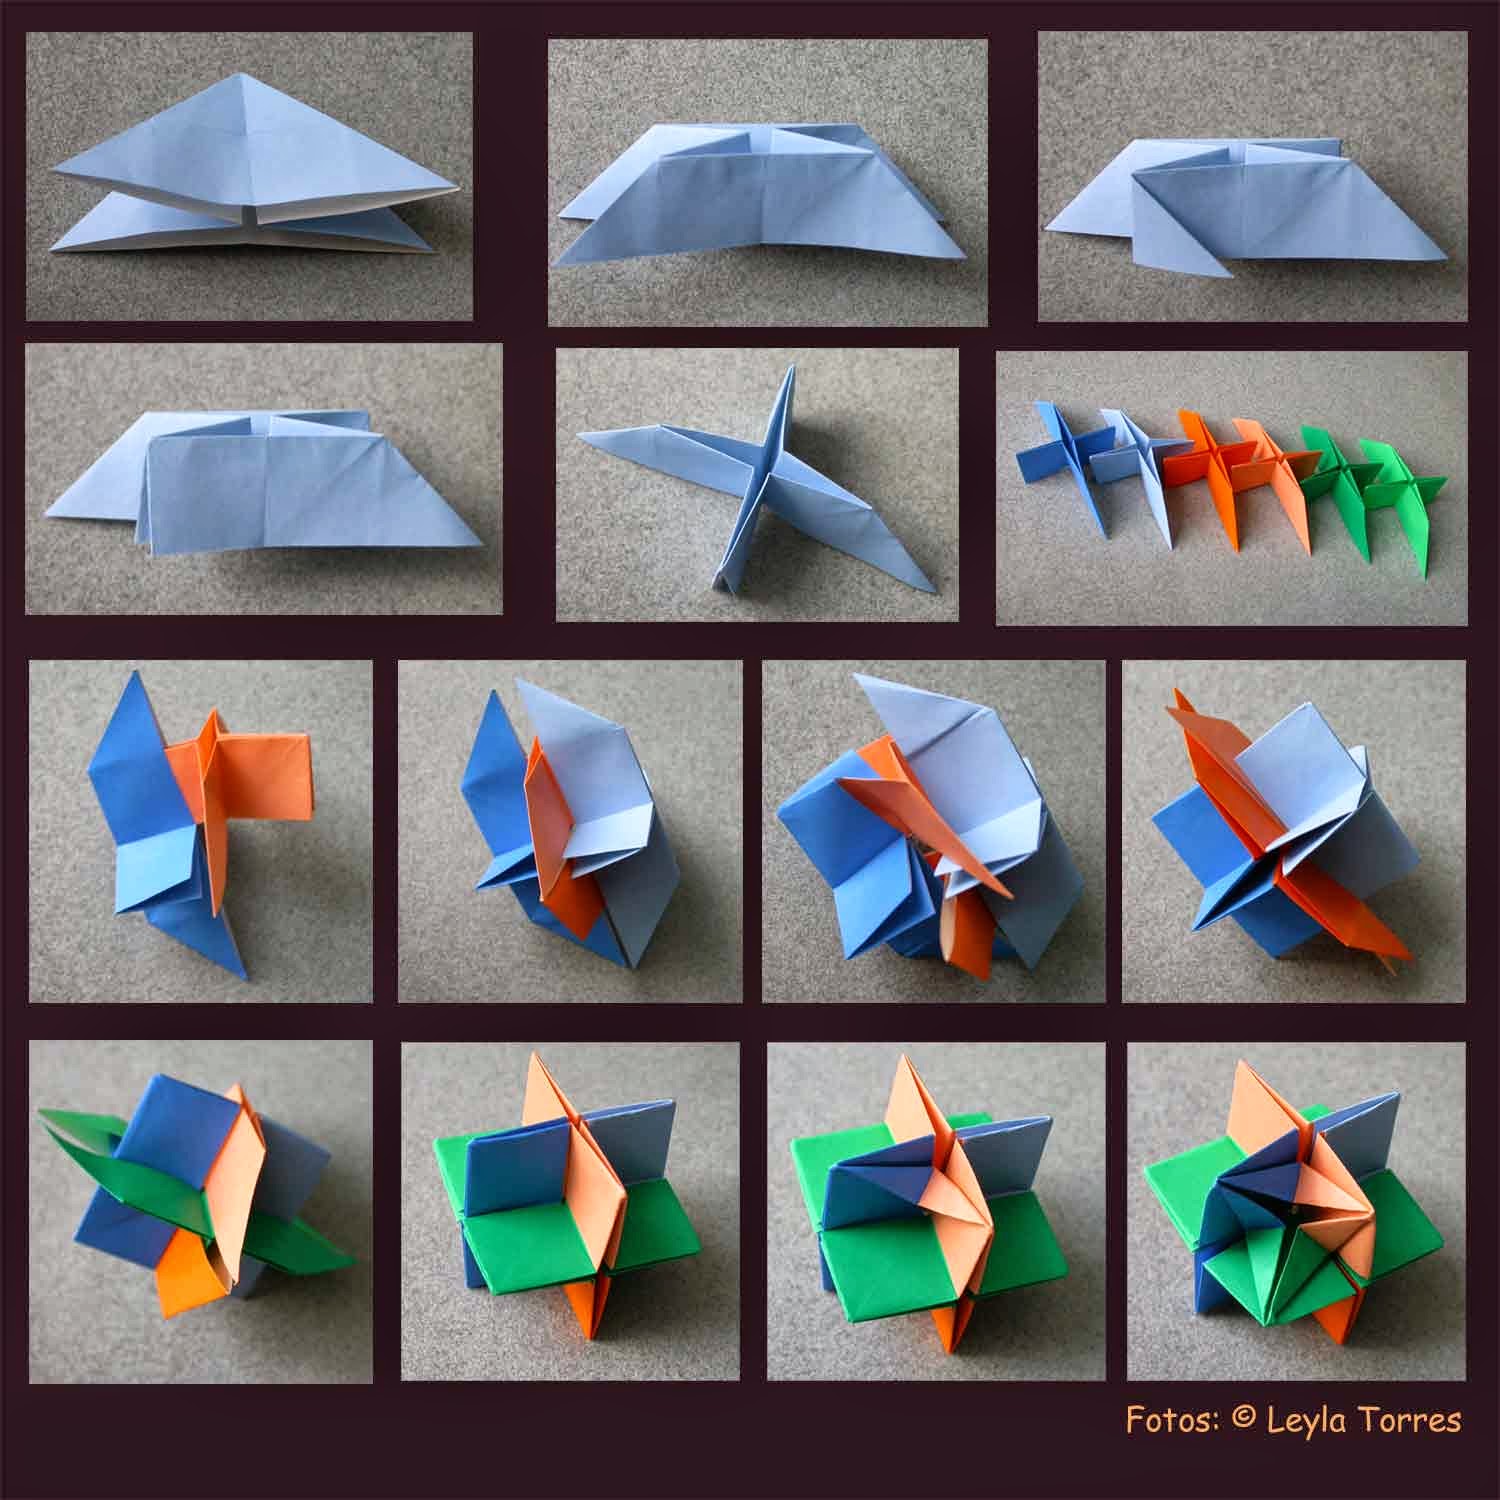 omega-star-origami-diagram-easy-crafts-ideas-to-make